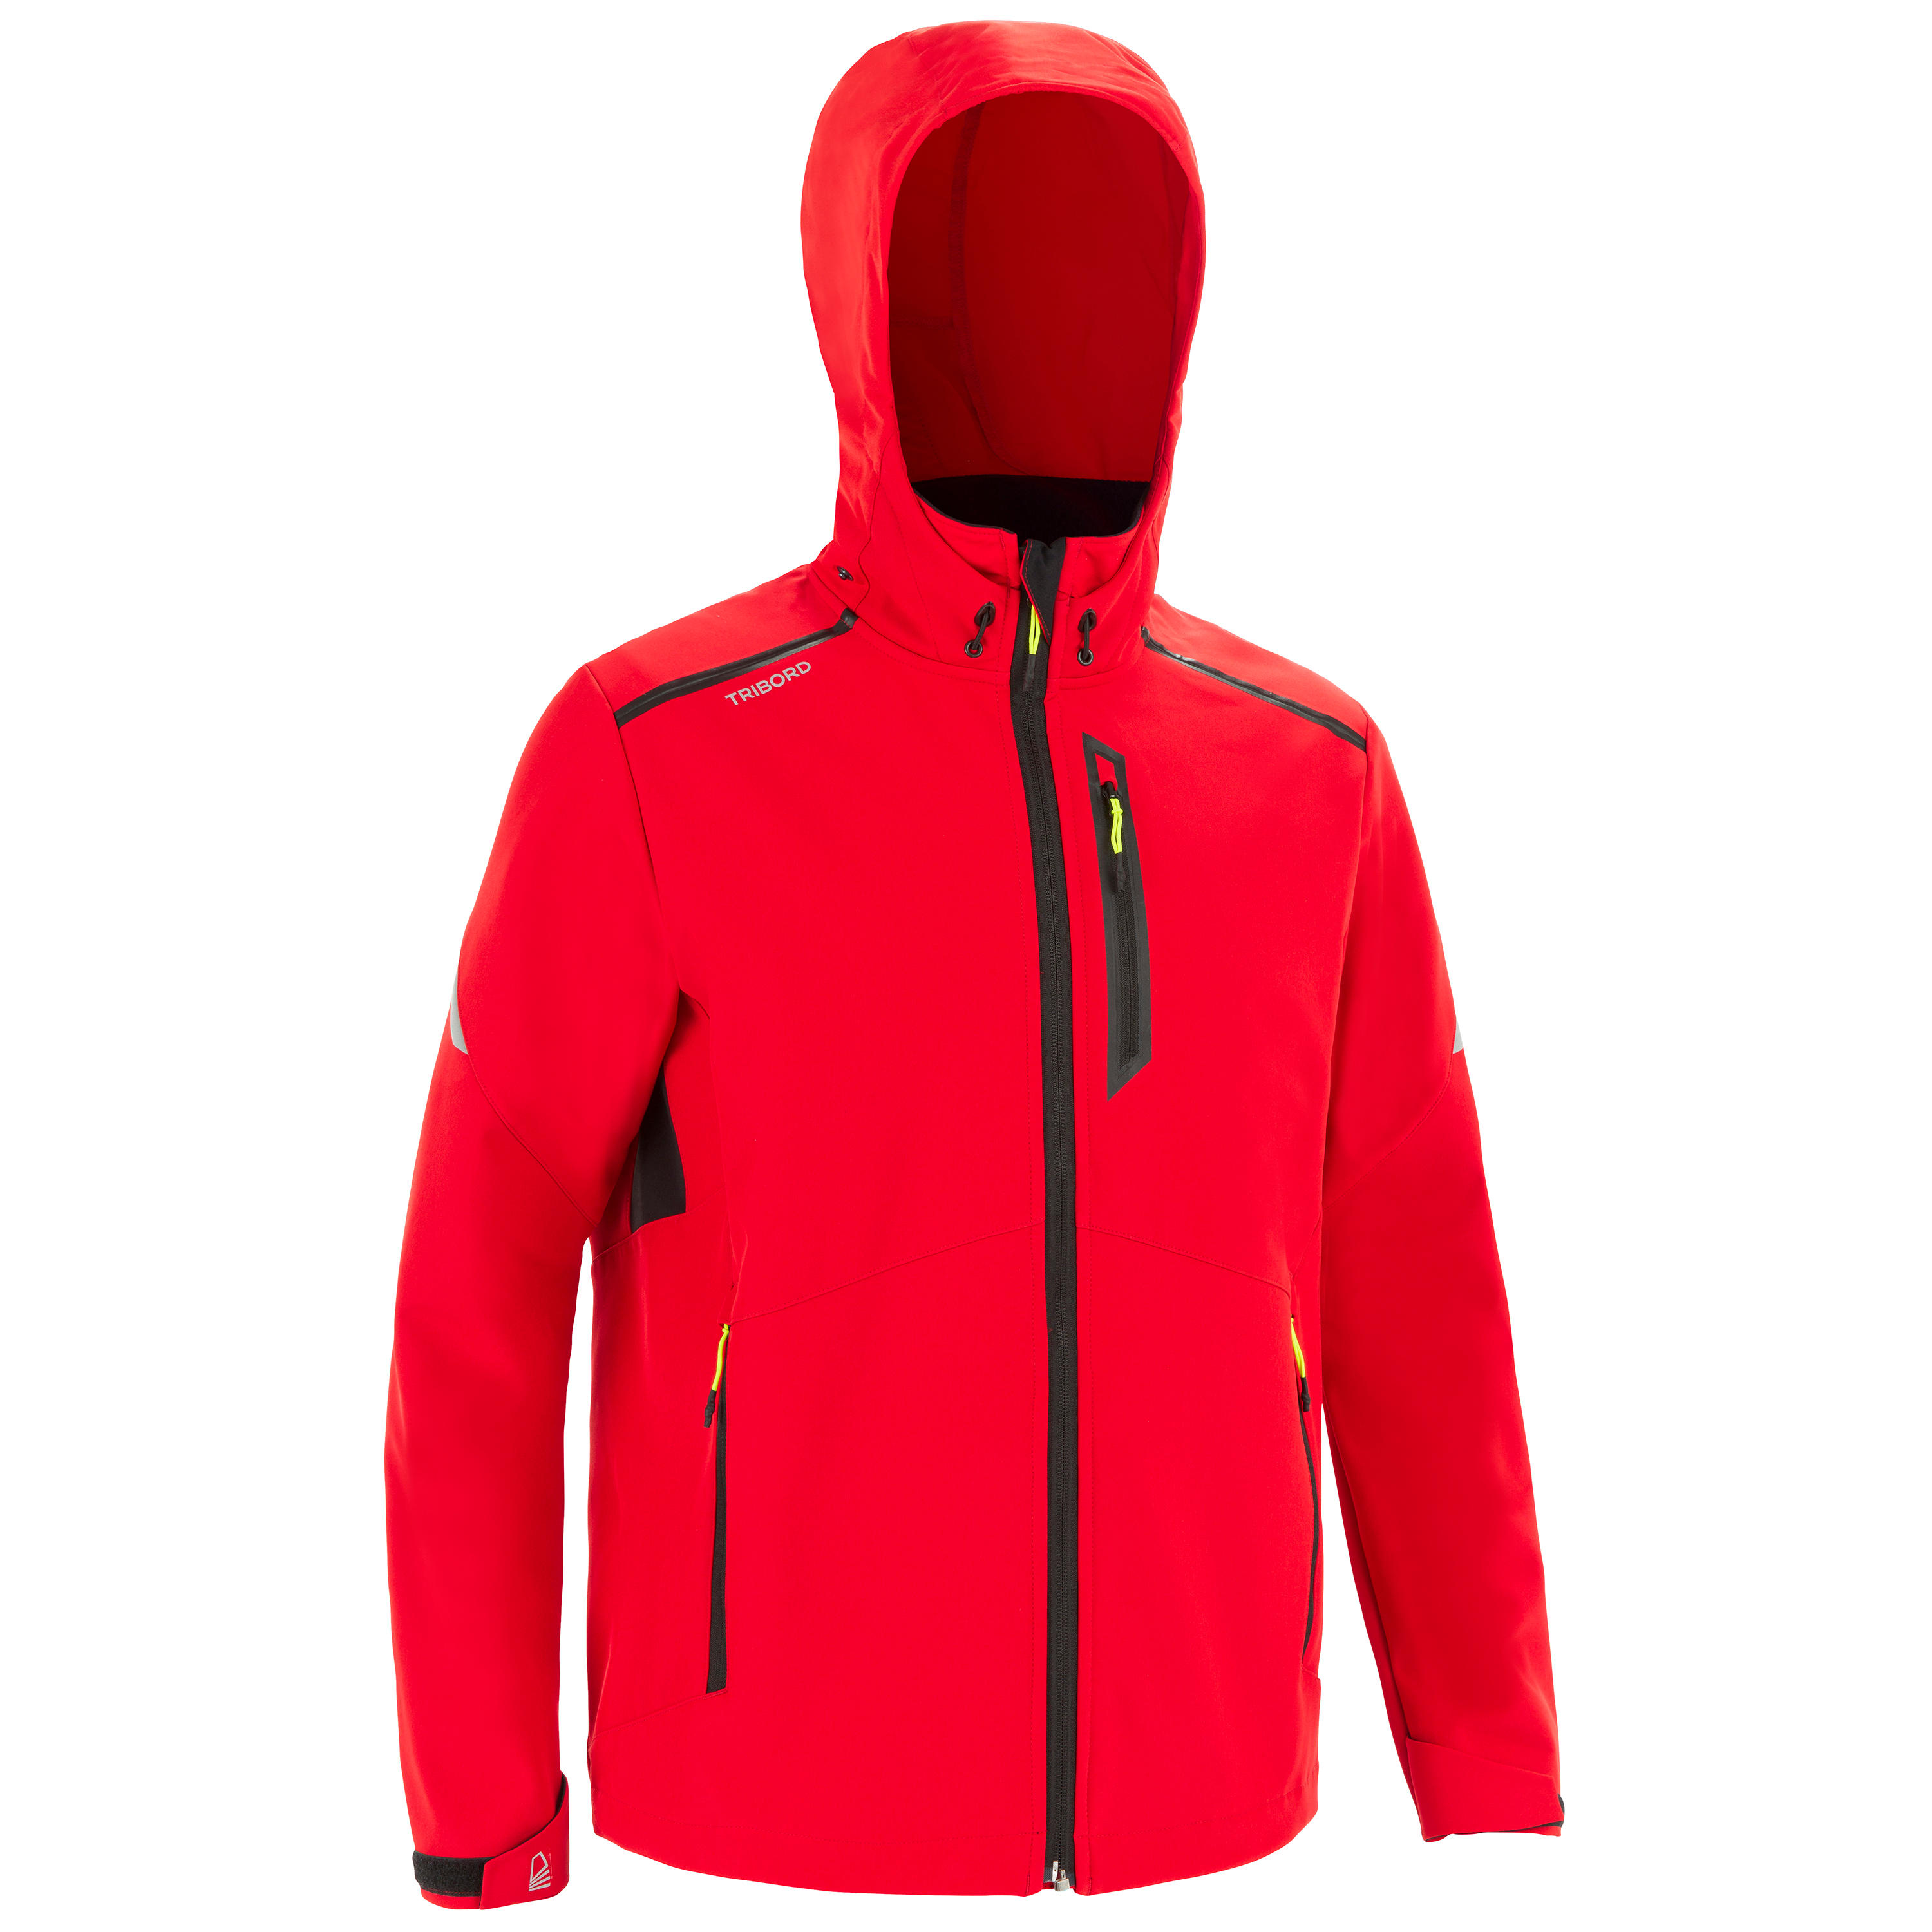 Men’s Sailing windproof Softshell jacket 900 - Red 1/14